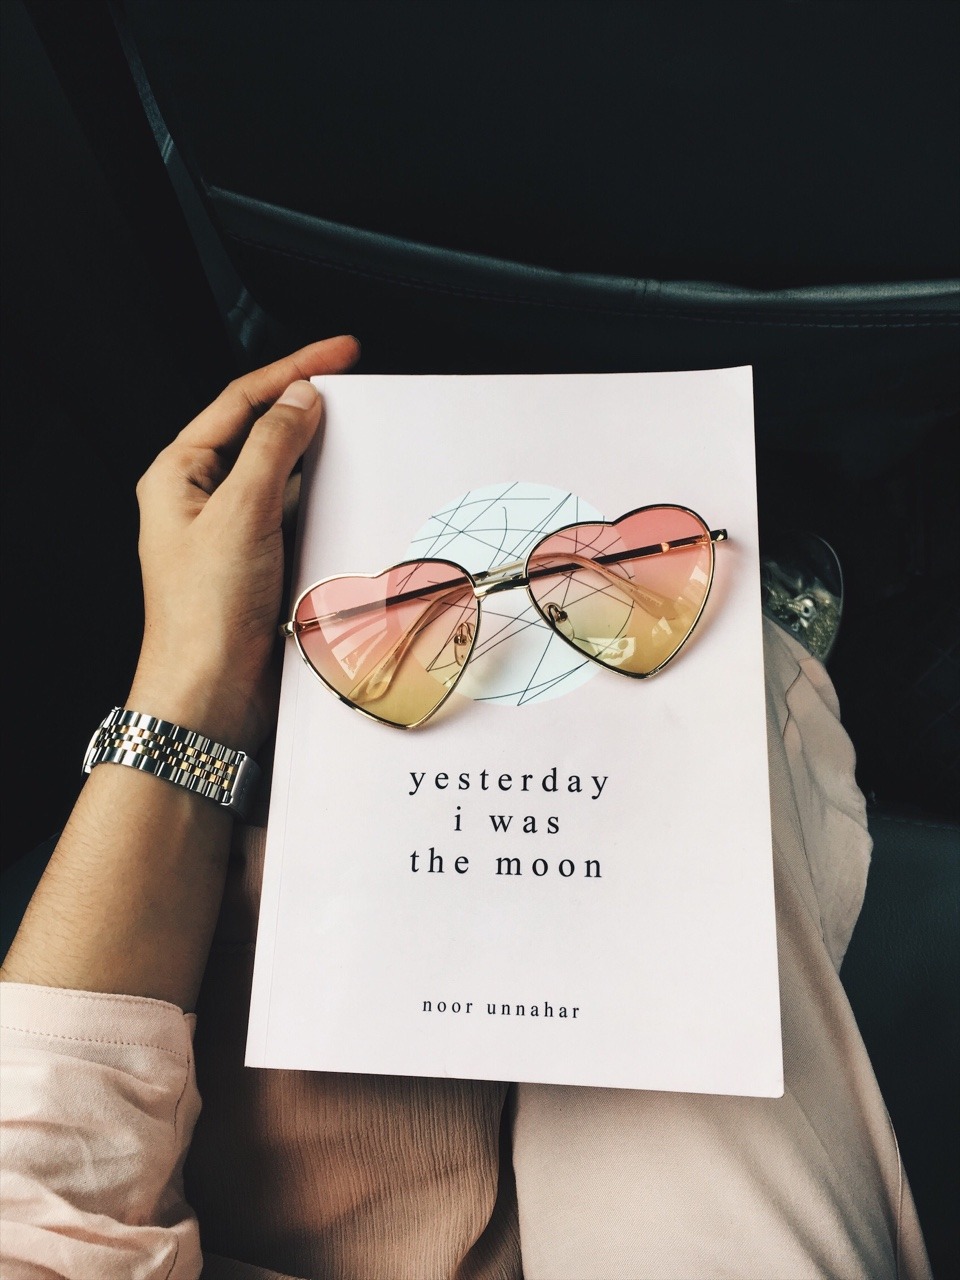 get {yesterday i was the moon 🌙} from amazon
(also available on book depository / barnes & nobles / your local bookstores)